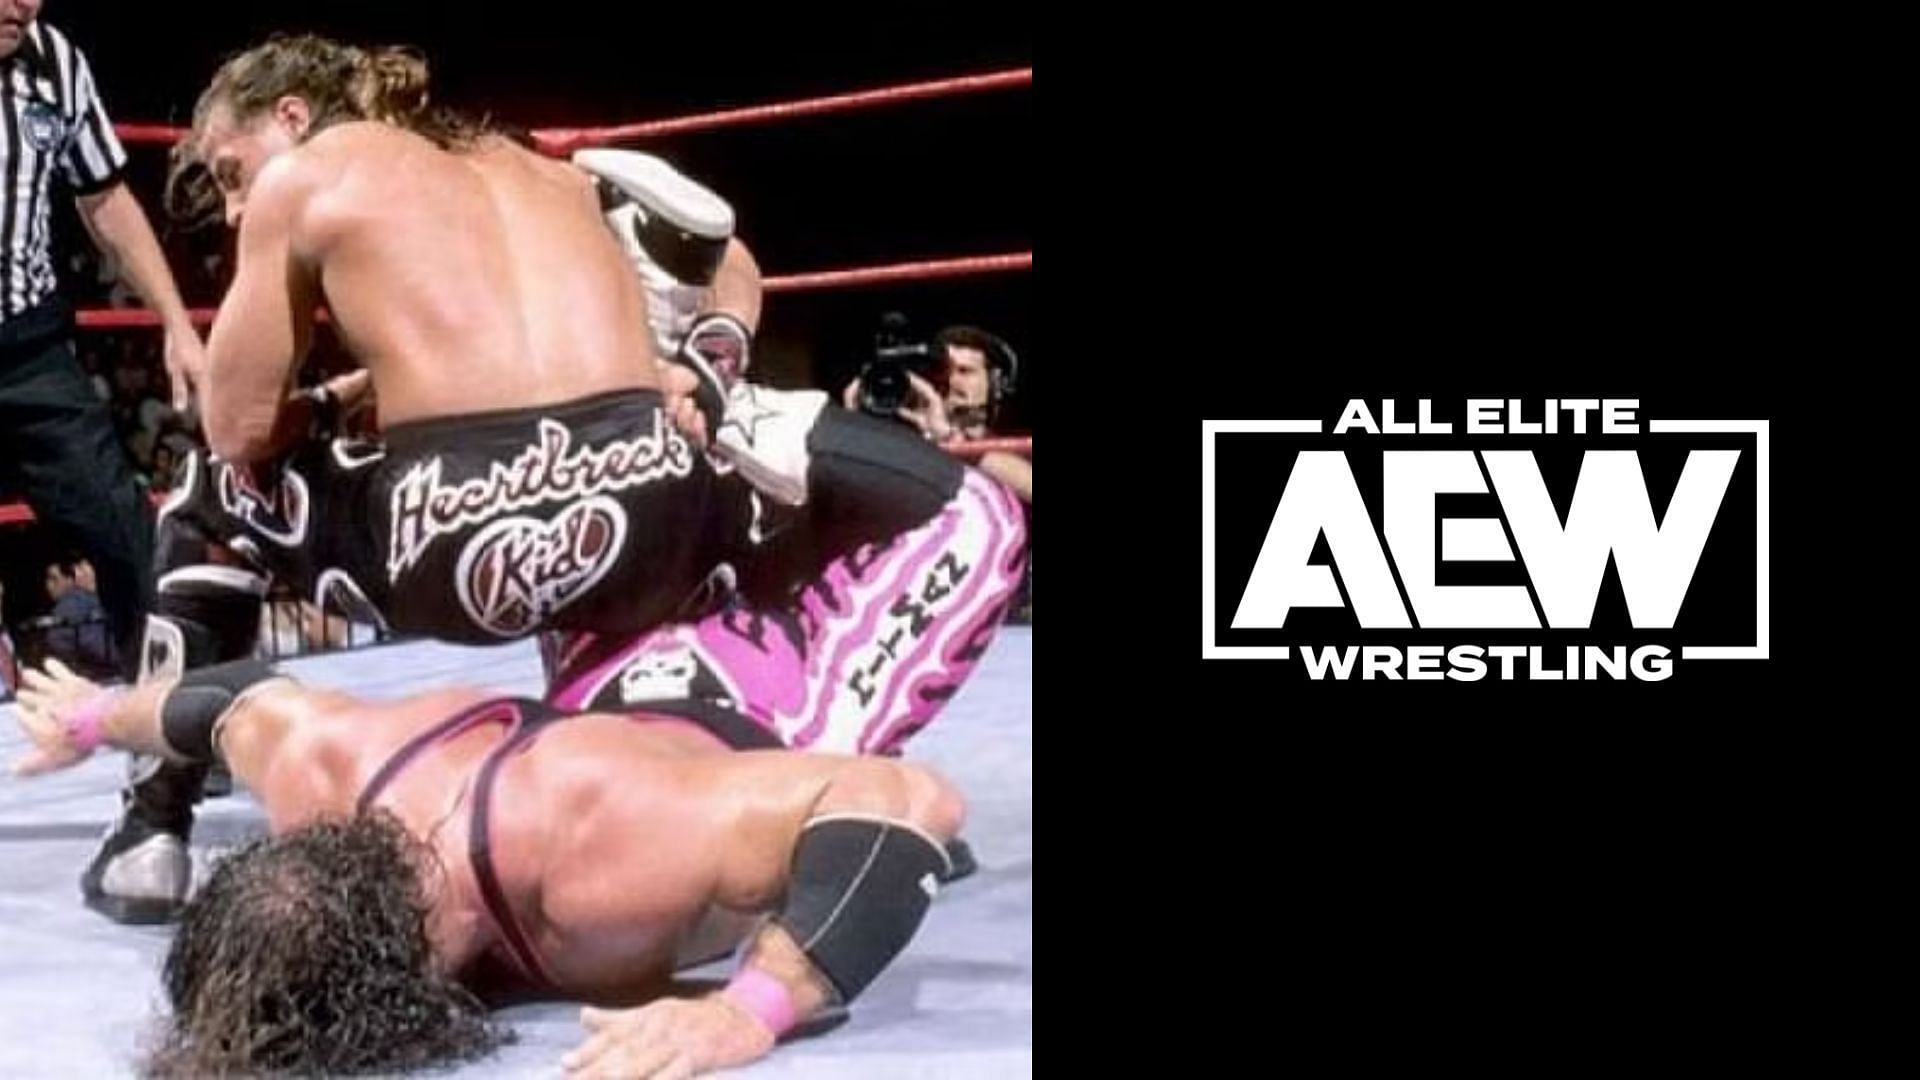 Montreal Screwjob is one of the most famous incidents in wrestling